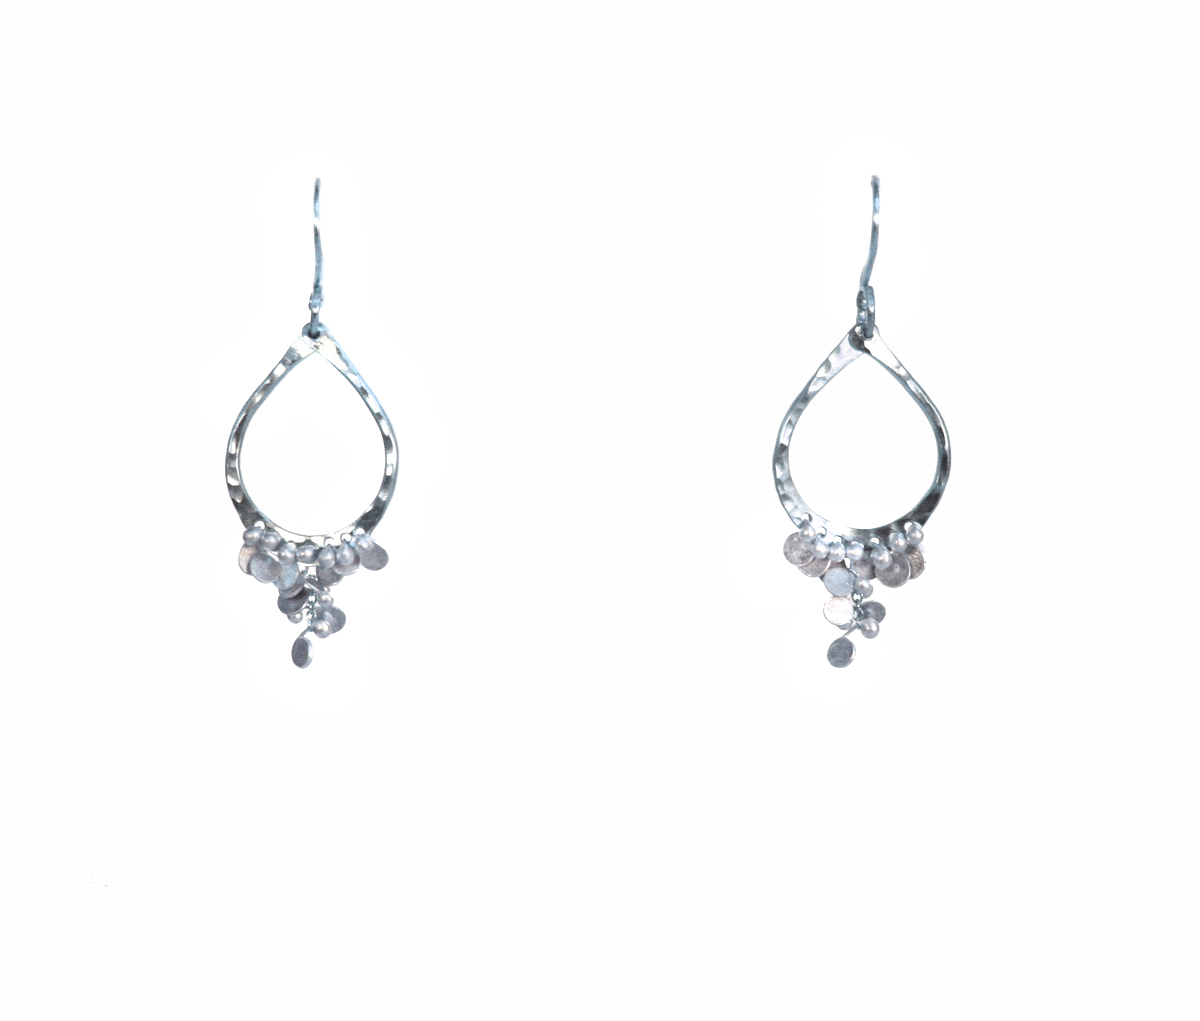 YED OMI - SMALL TEAR CONFETTI EARRING, STERLING SILVER - STERLING SILVER